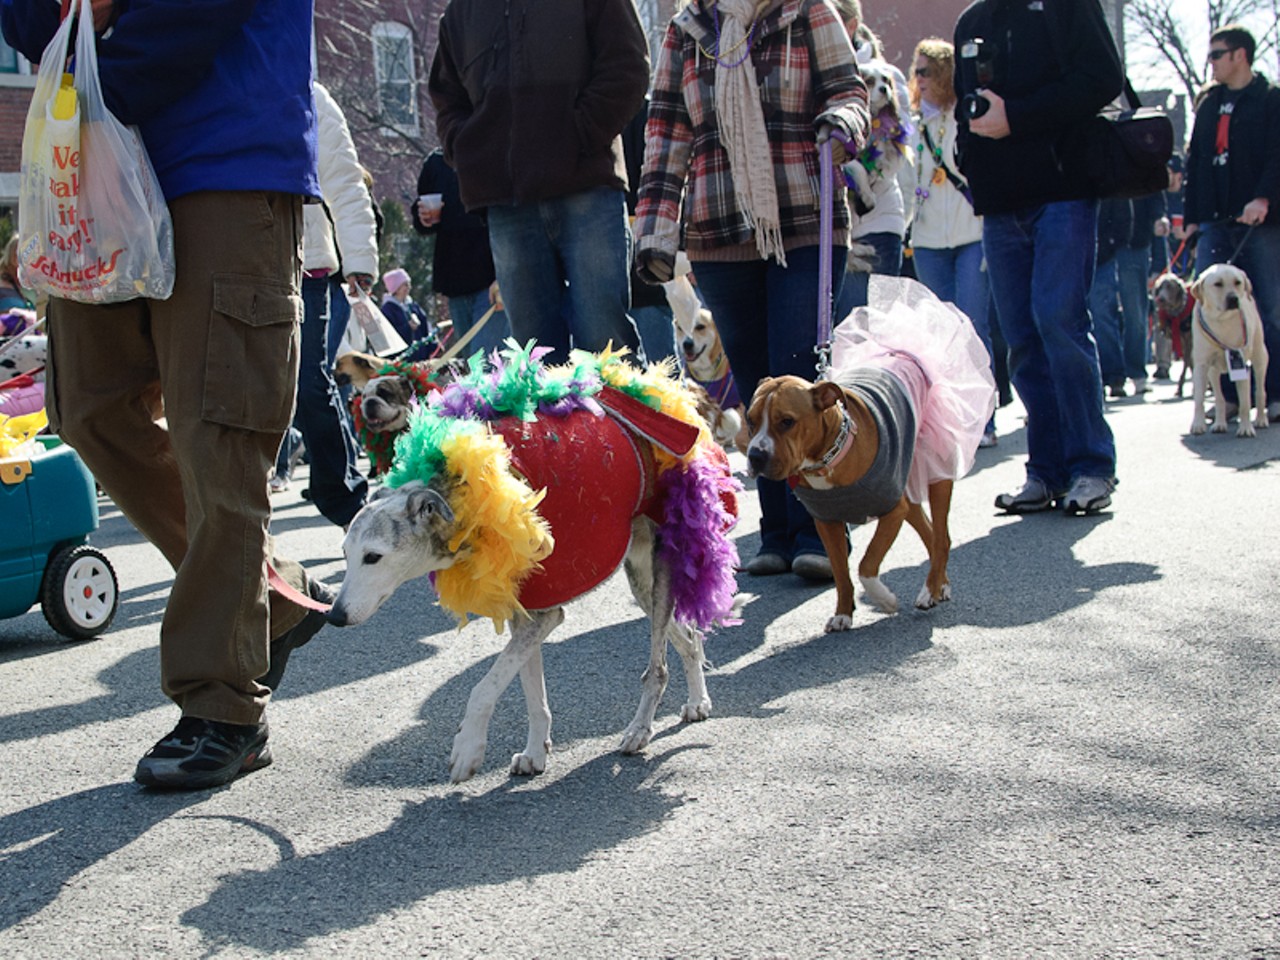 Mardi Gras for dogs? You betcha. The dog parade gives creative canines an excuse to get dressed up.